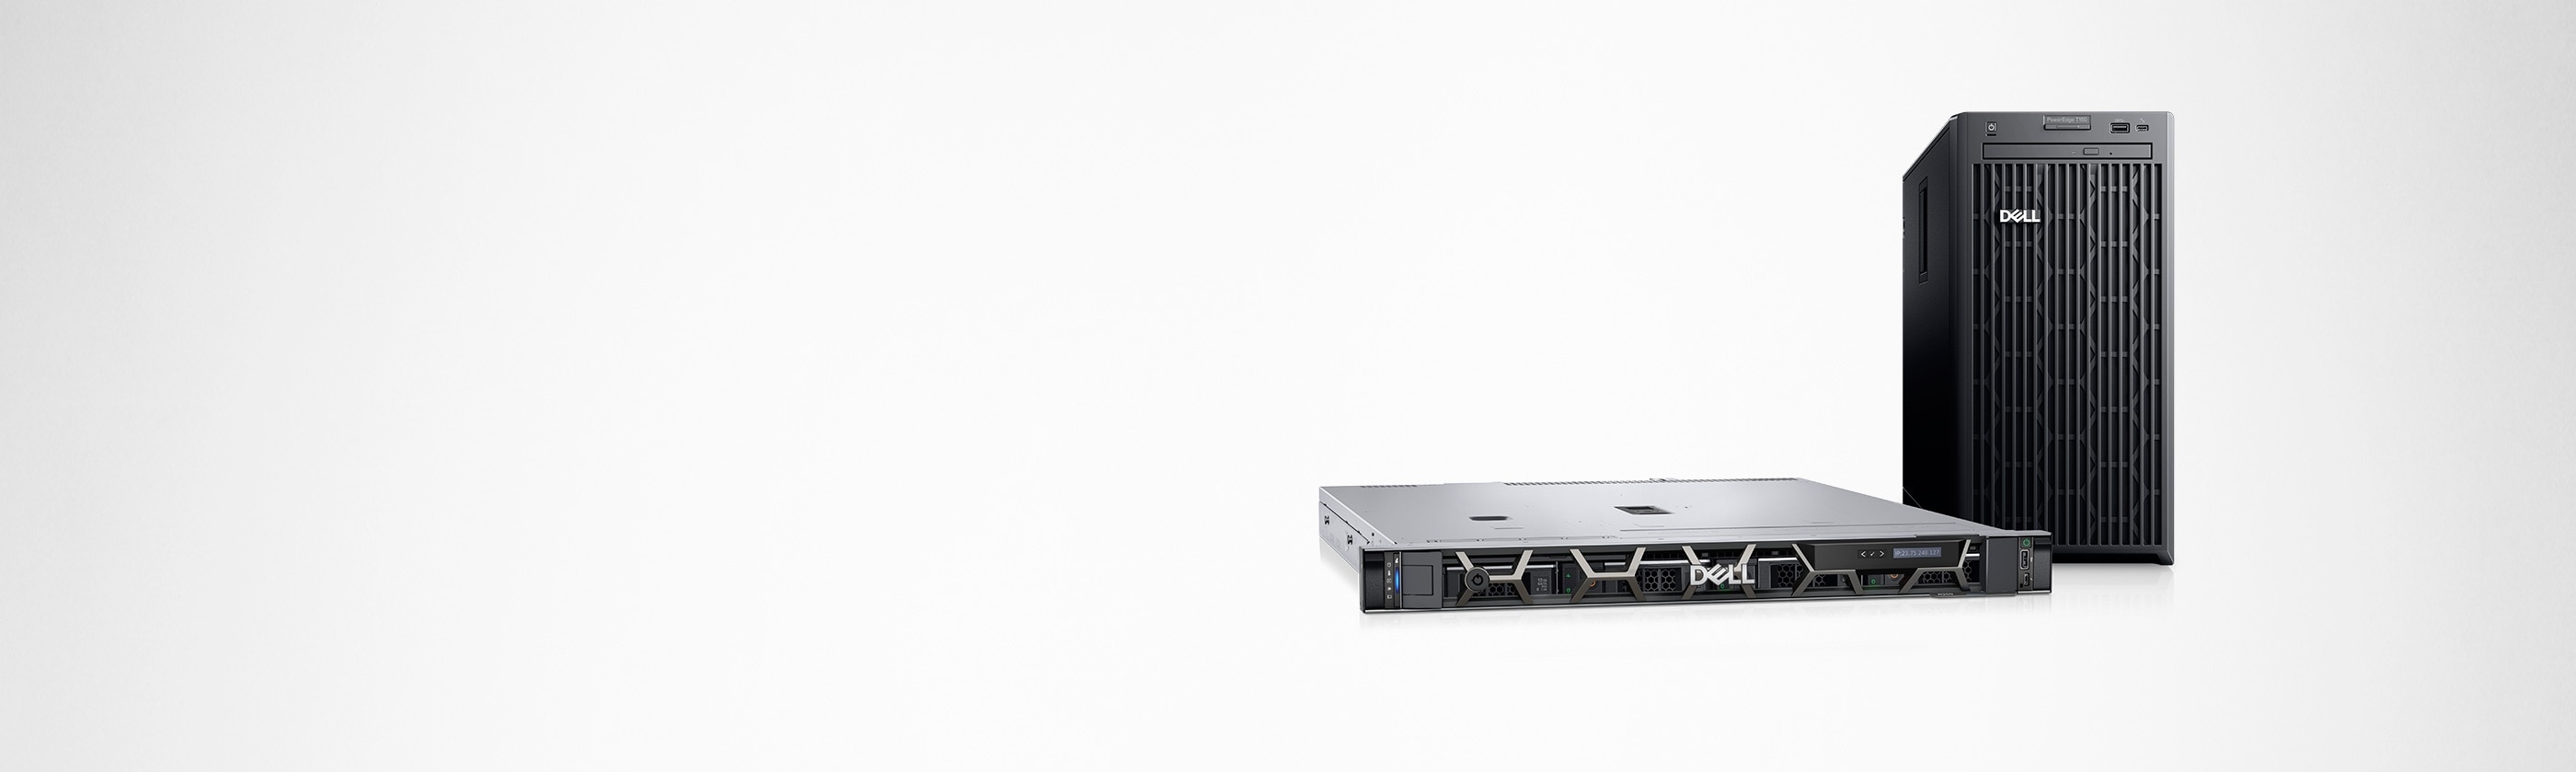 Dell small business servers